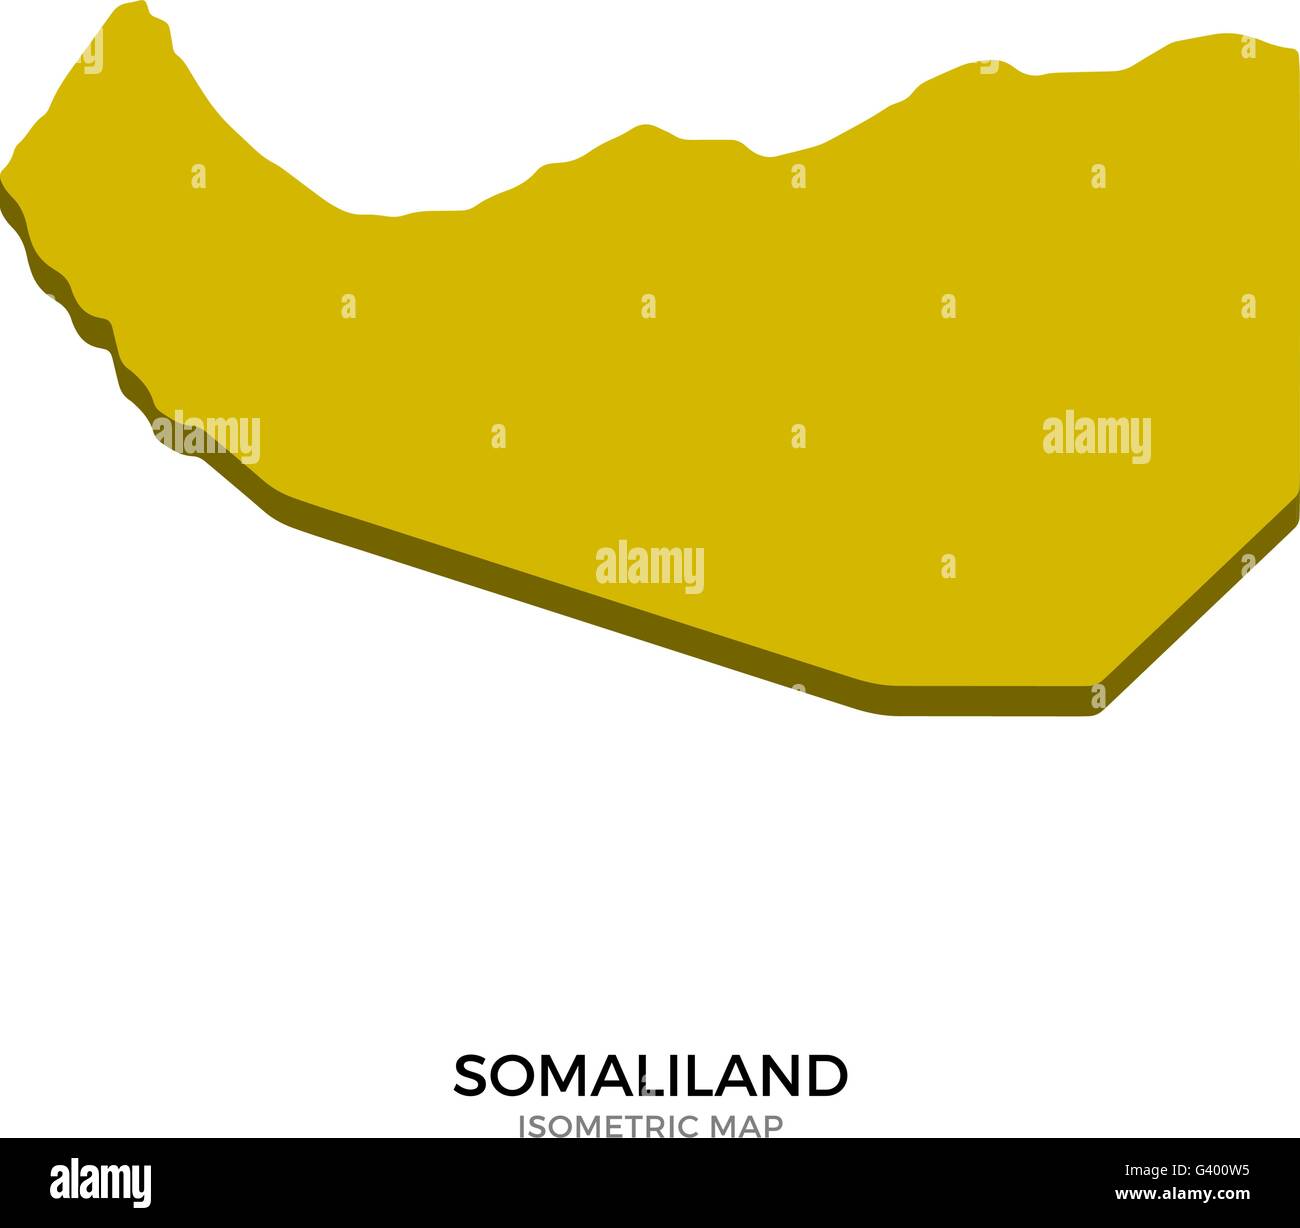 Isometric map of Somaliland detailed vector illustration Stock Vector